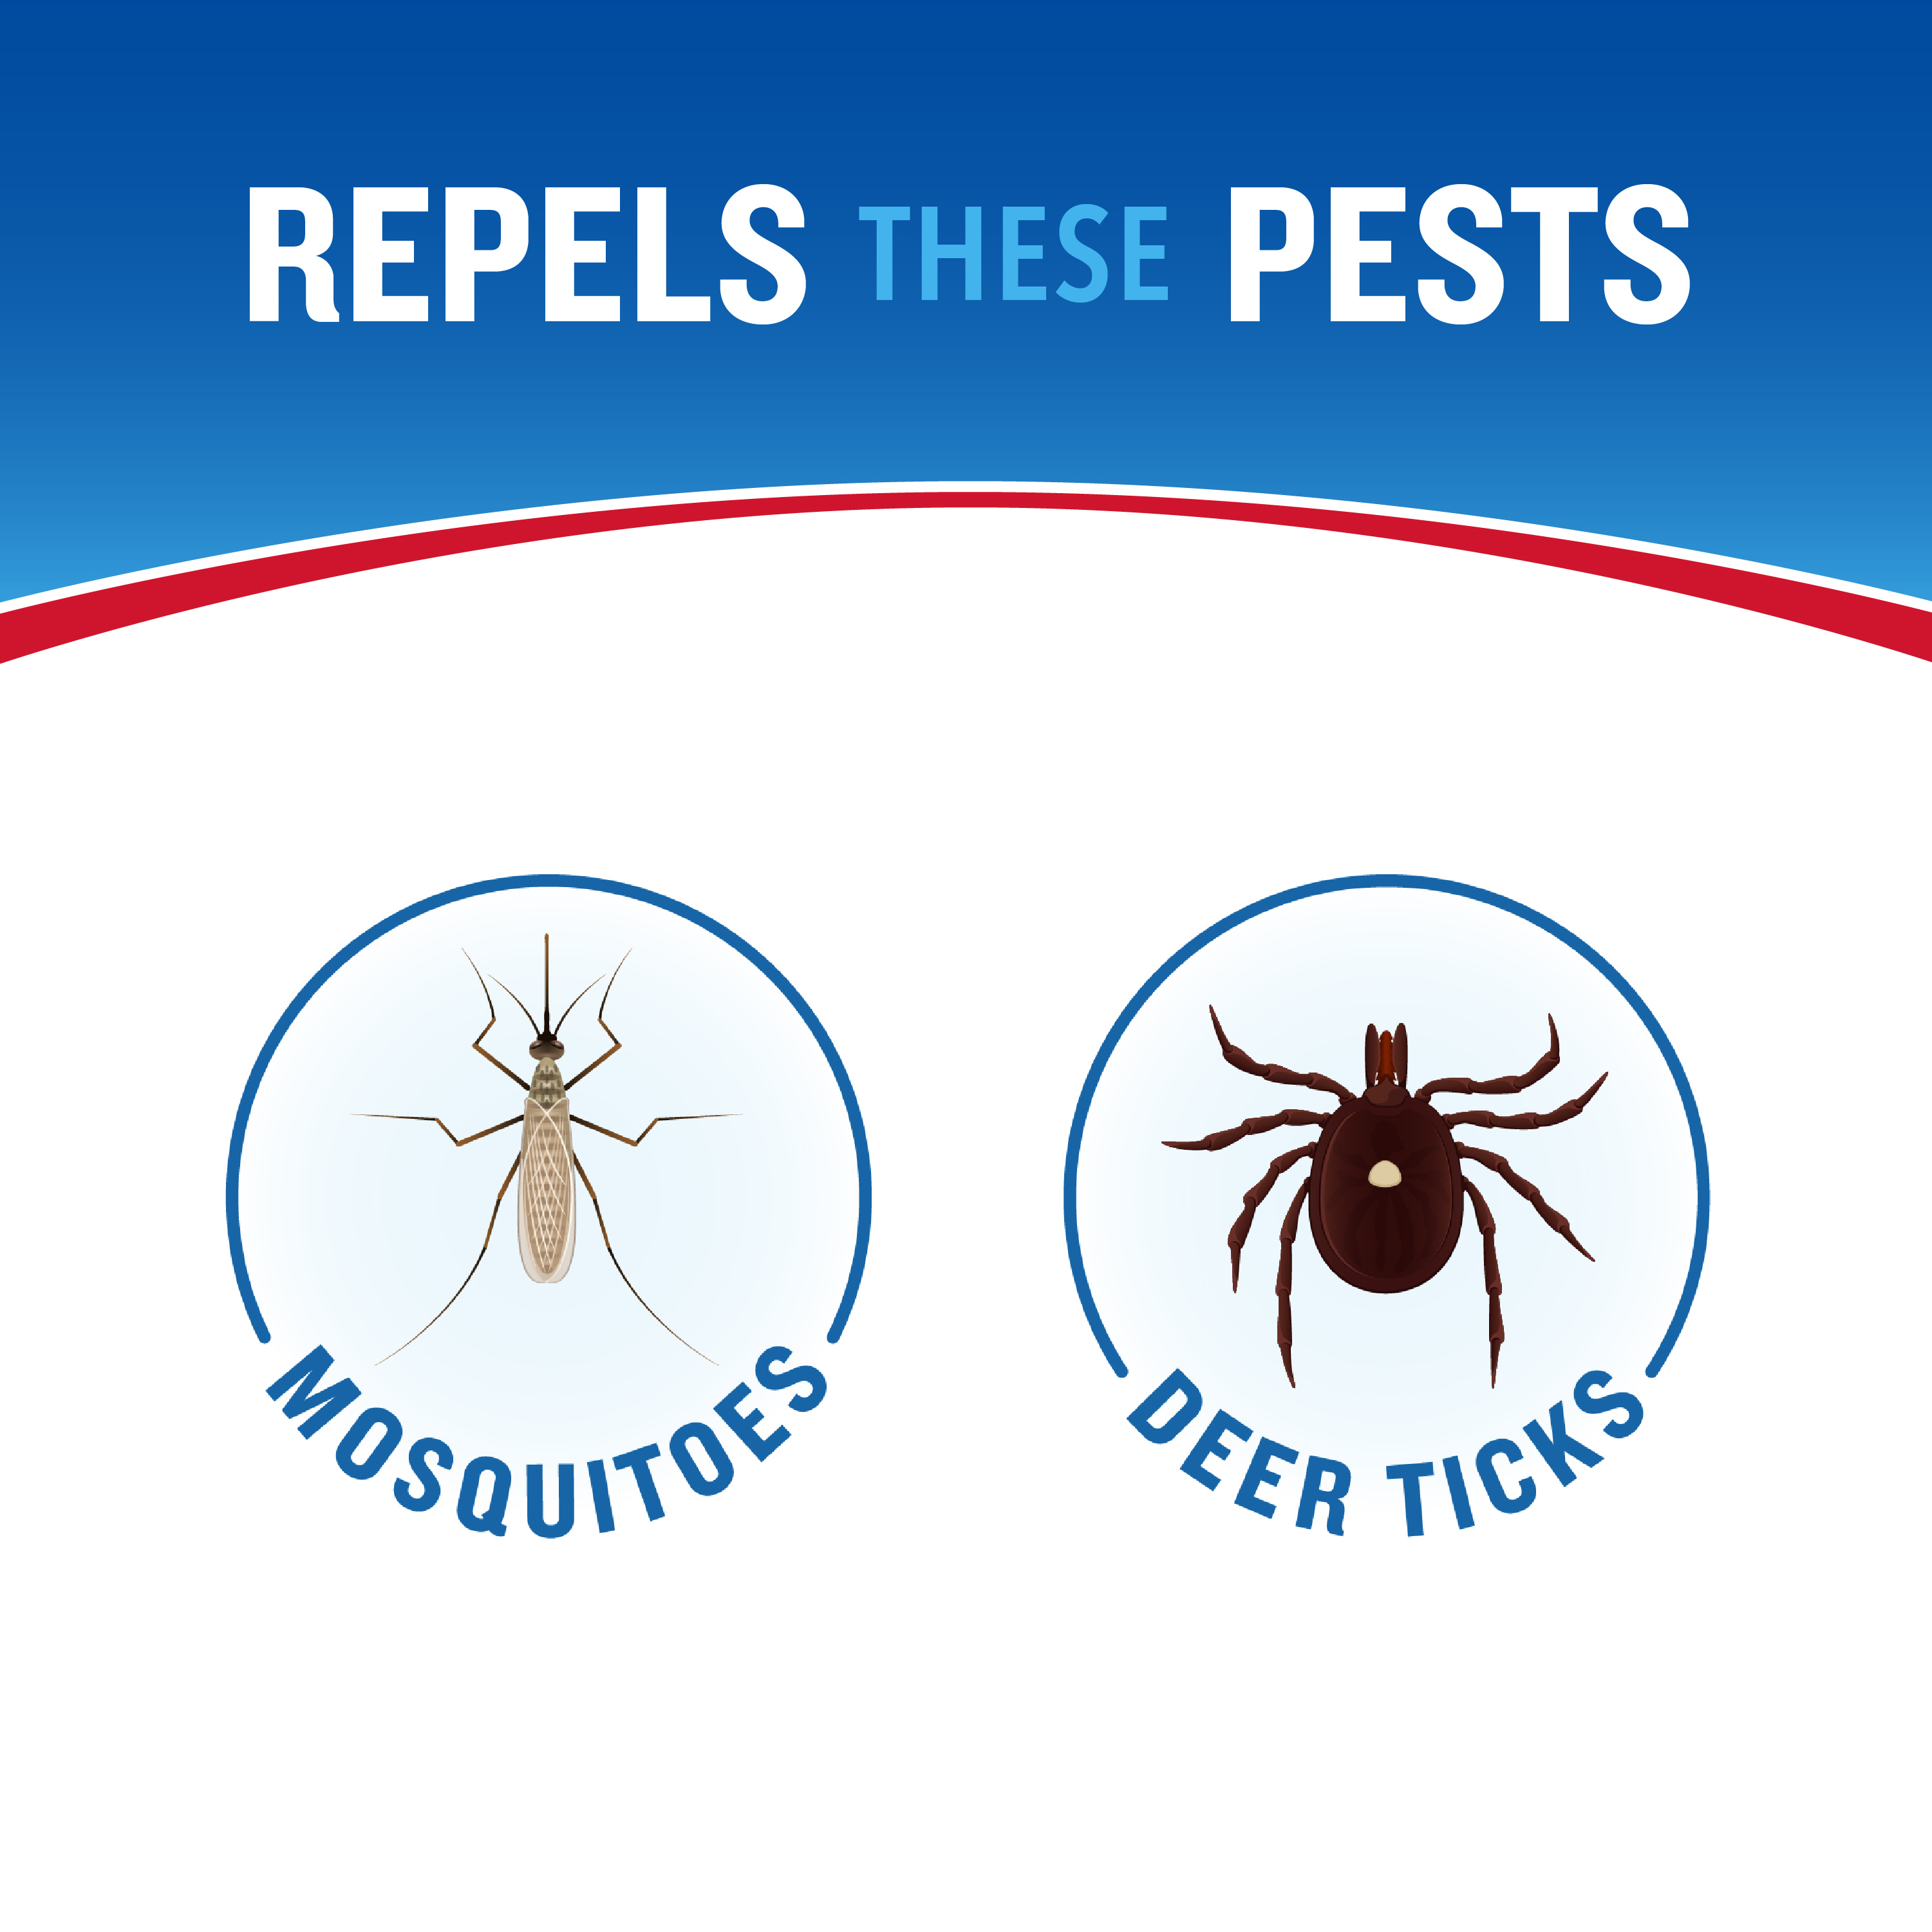 HG-96851 Backwoods® Tick Defense® Insect Repellent 6 oz (Pump Spray) - Repels These Pests